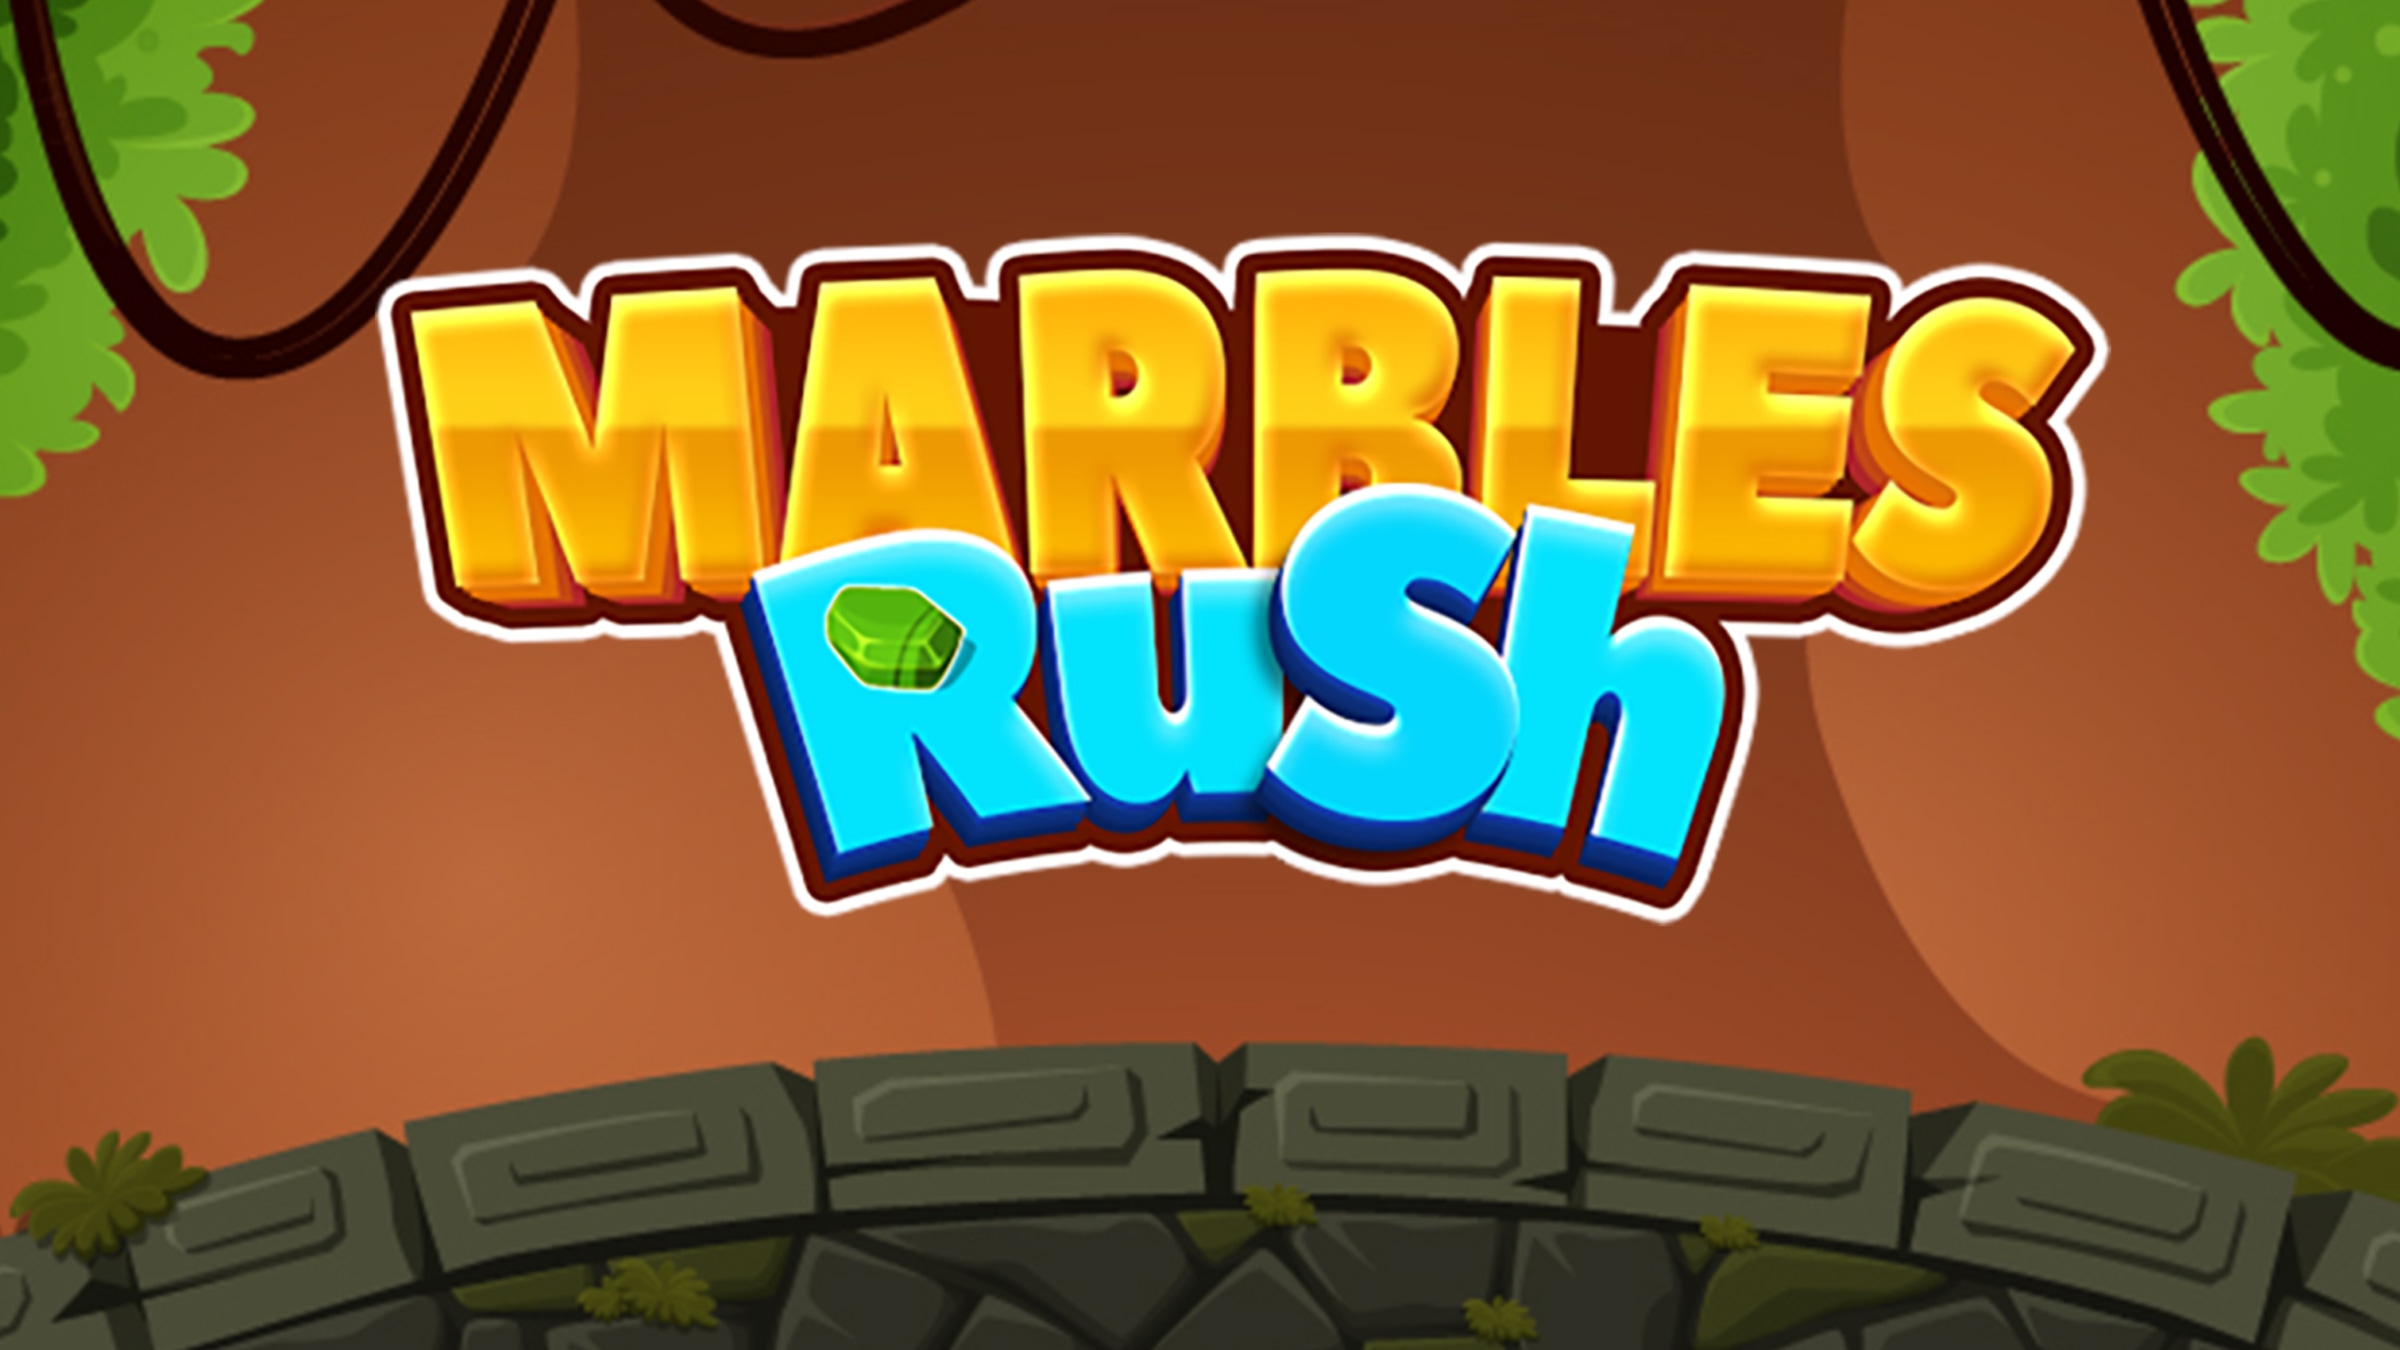 Marbles Rush for Nintendo Switch